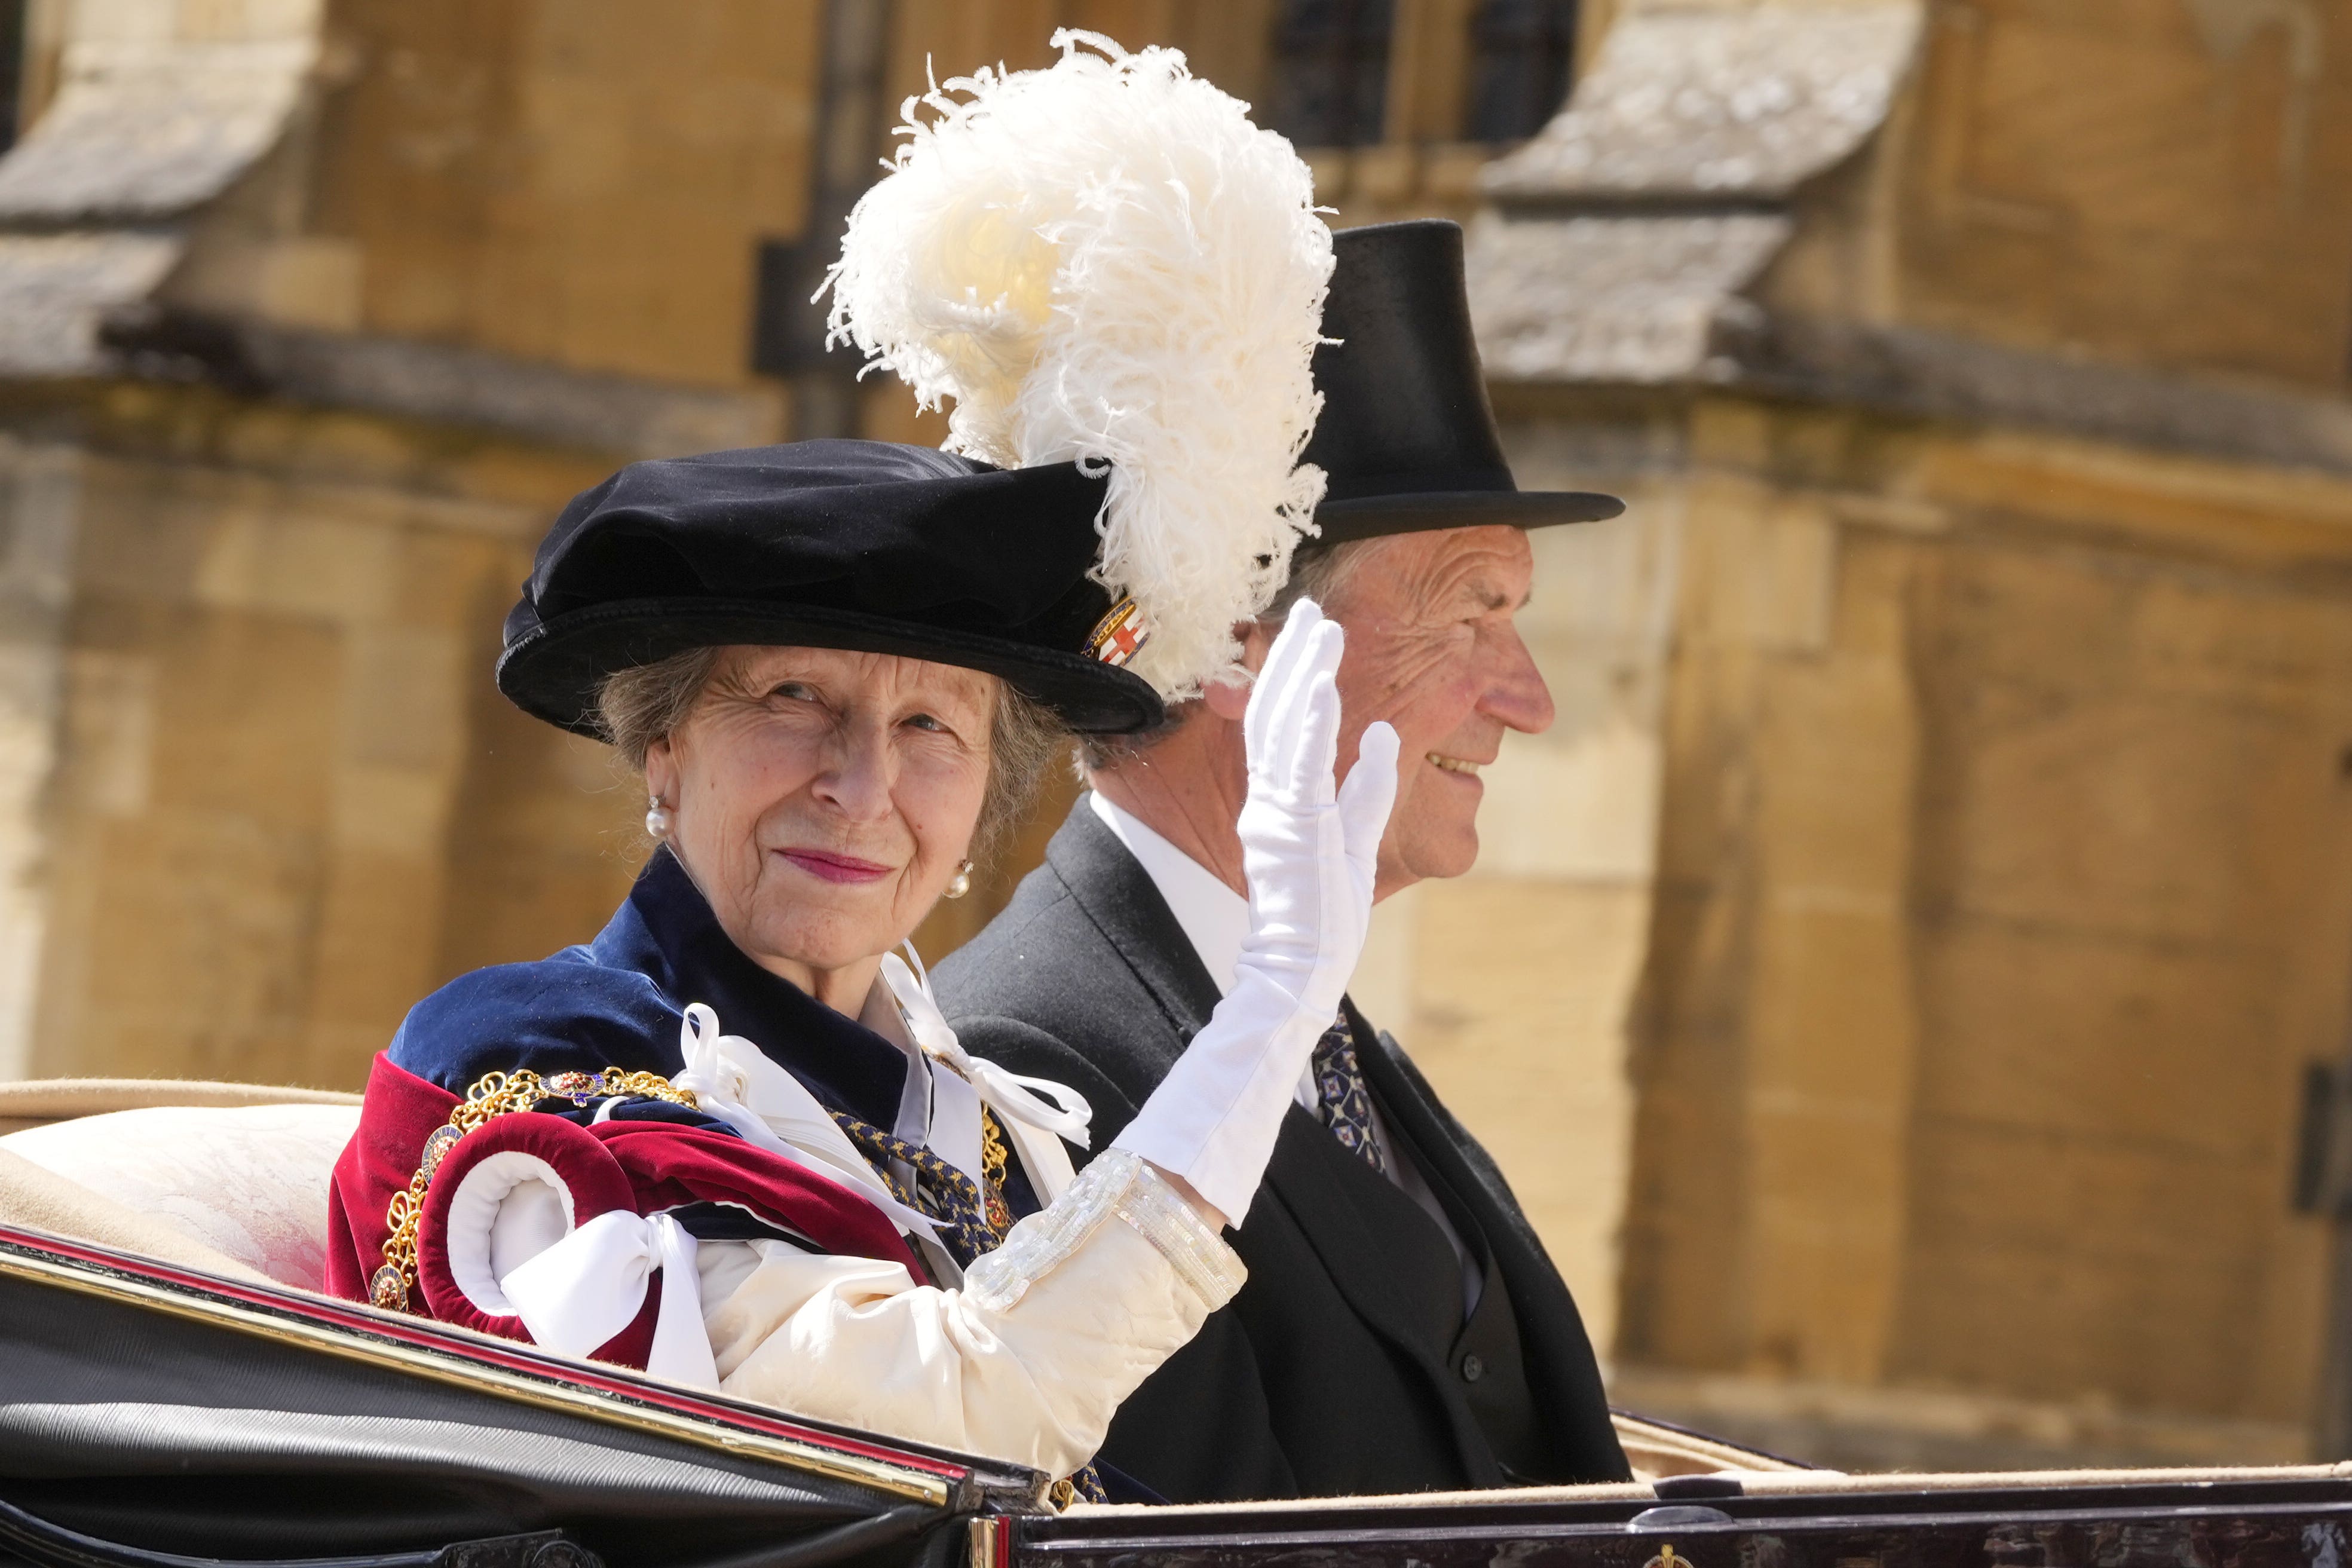 Princess Anne was released from hospital last Friday after being kicked by a horse.